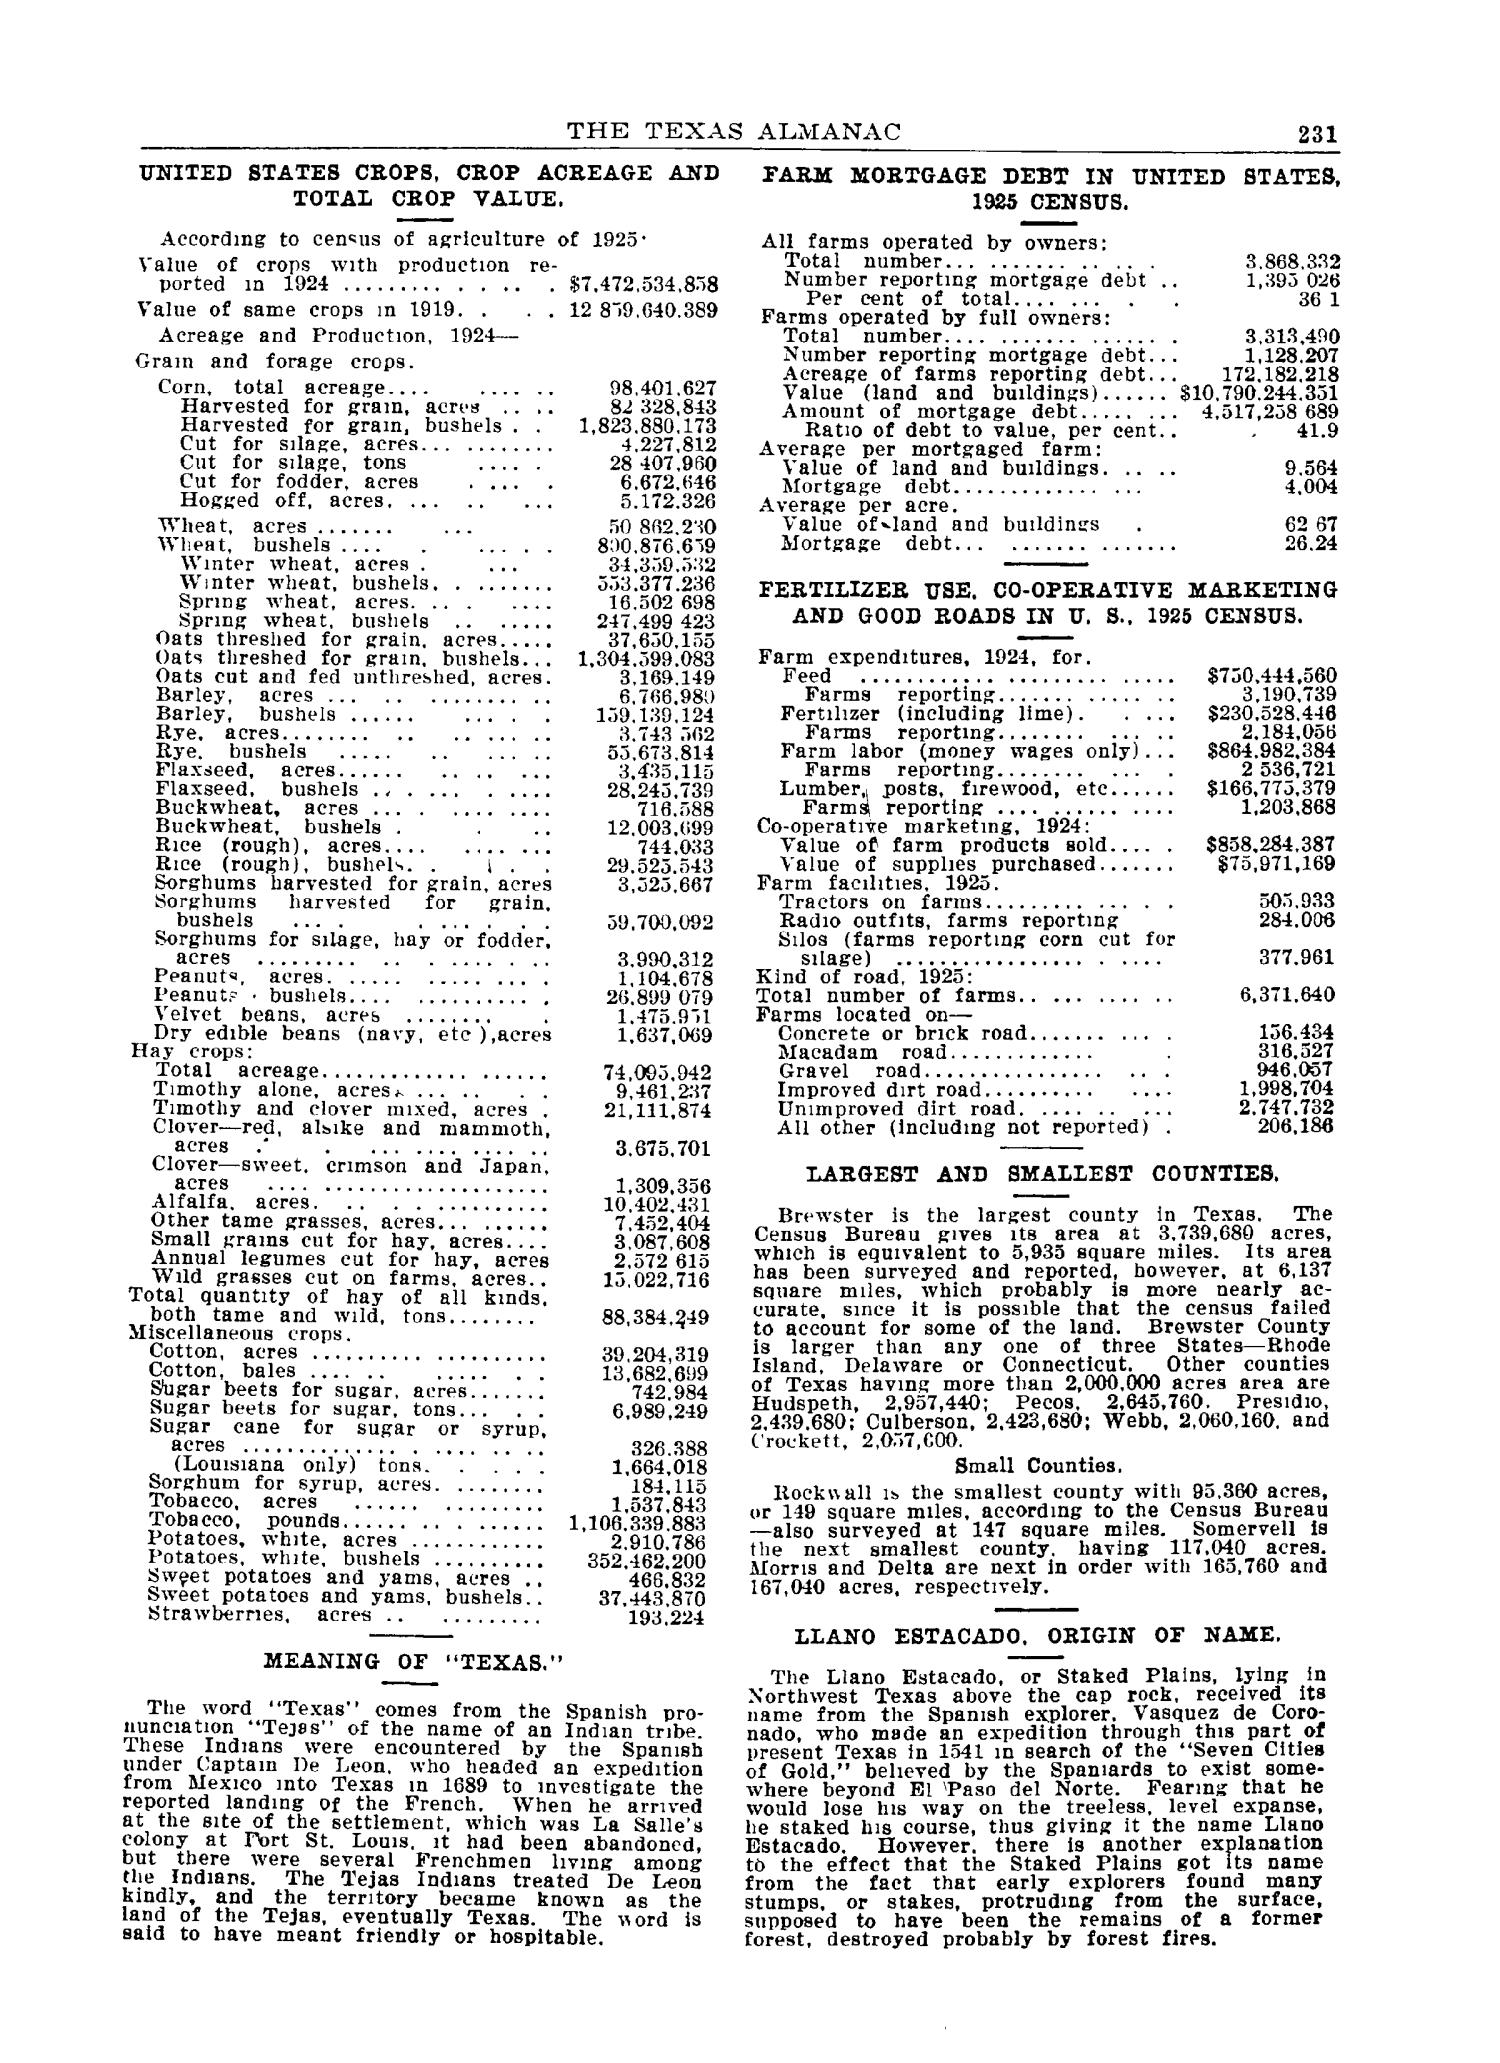 The 1928 Texas Almanac and State Industrial Guide
                                                
                                                    231
                                                